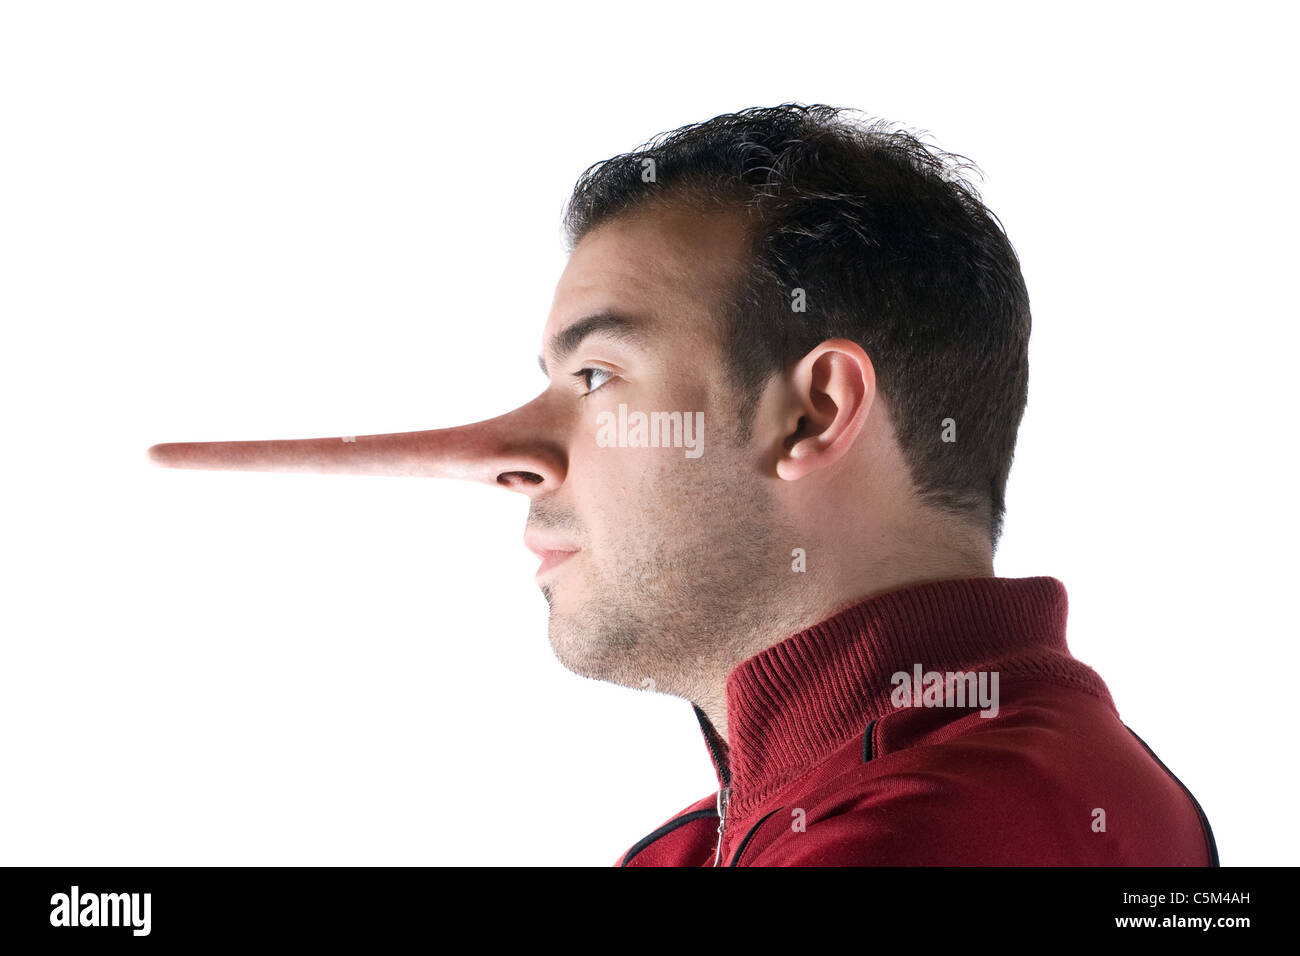 A dishonest man has a nose that grew long when he lied just like in the story of Pinocchio. Stock Photo